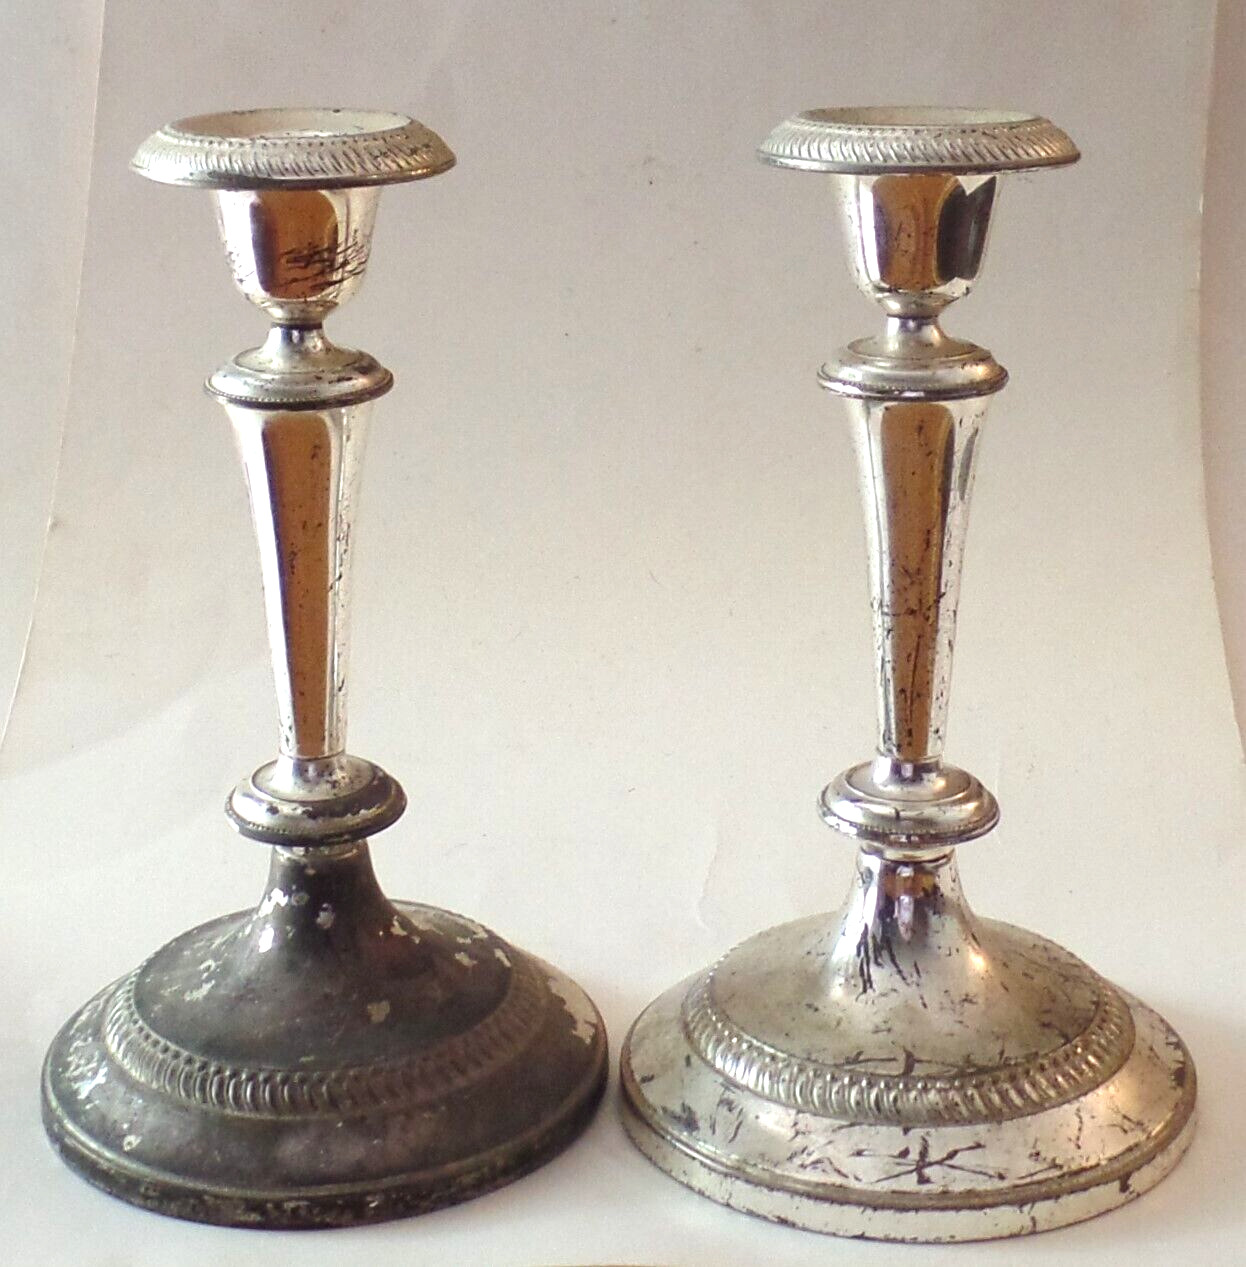 2 Antique Vintage Distressed Silver Tone Metal Candle Holders